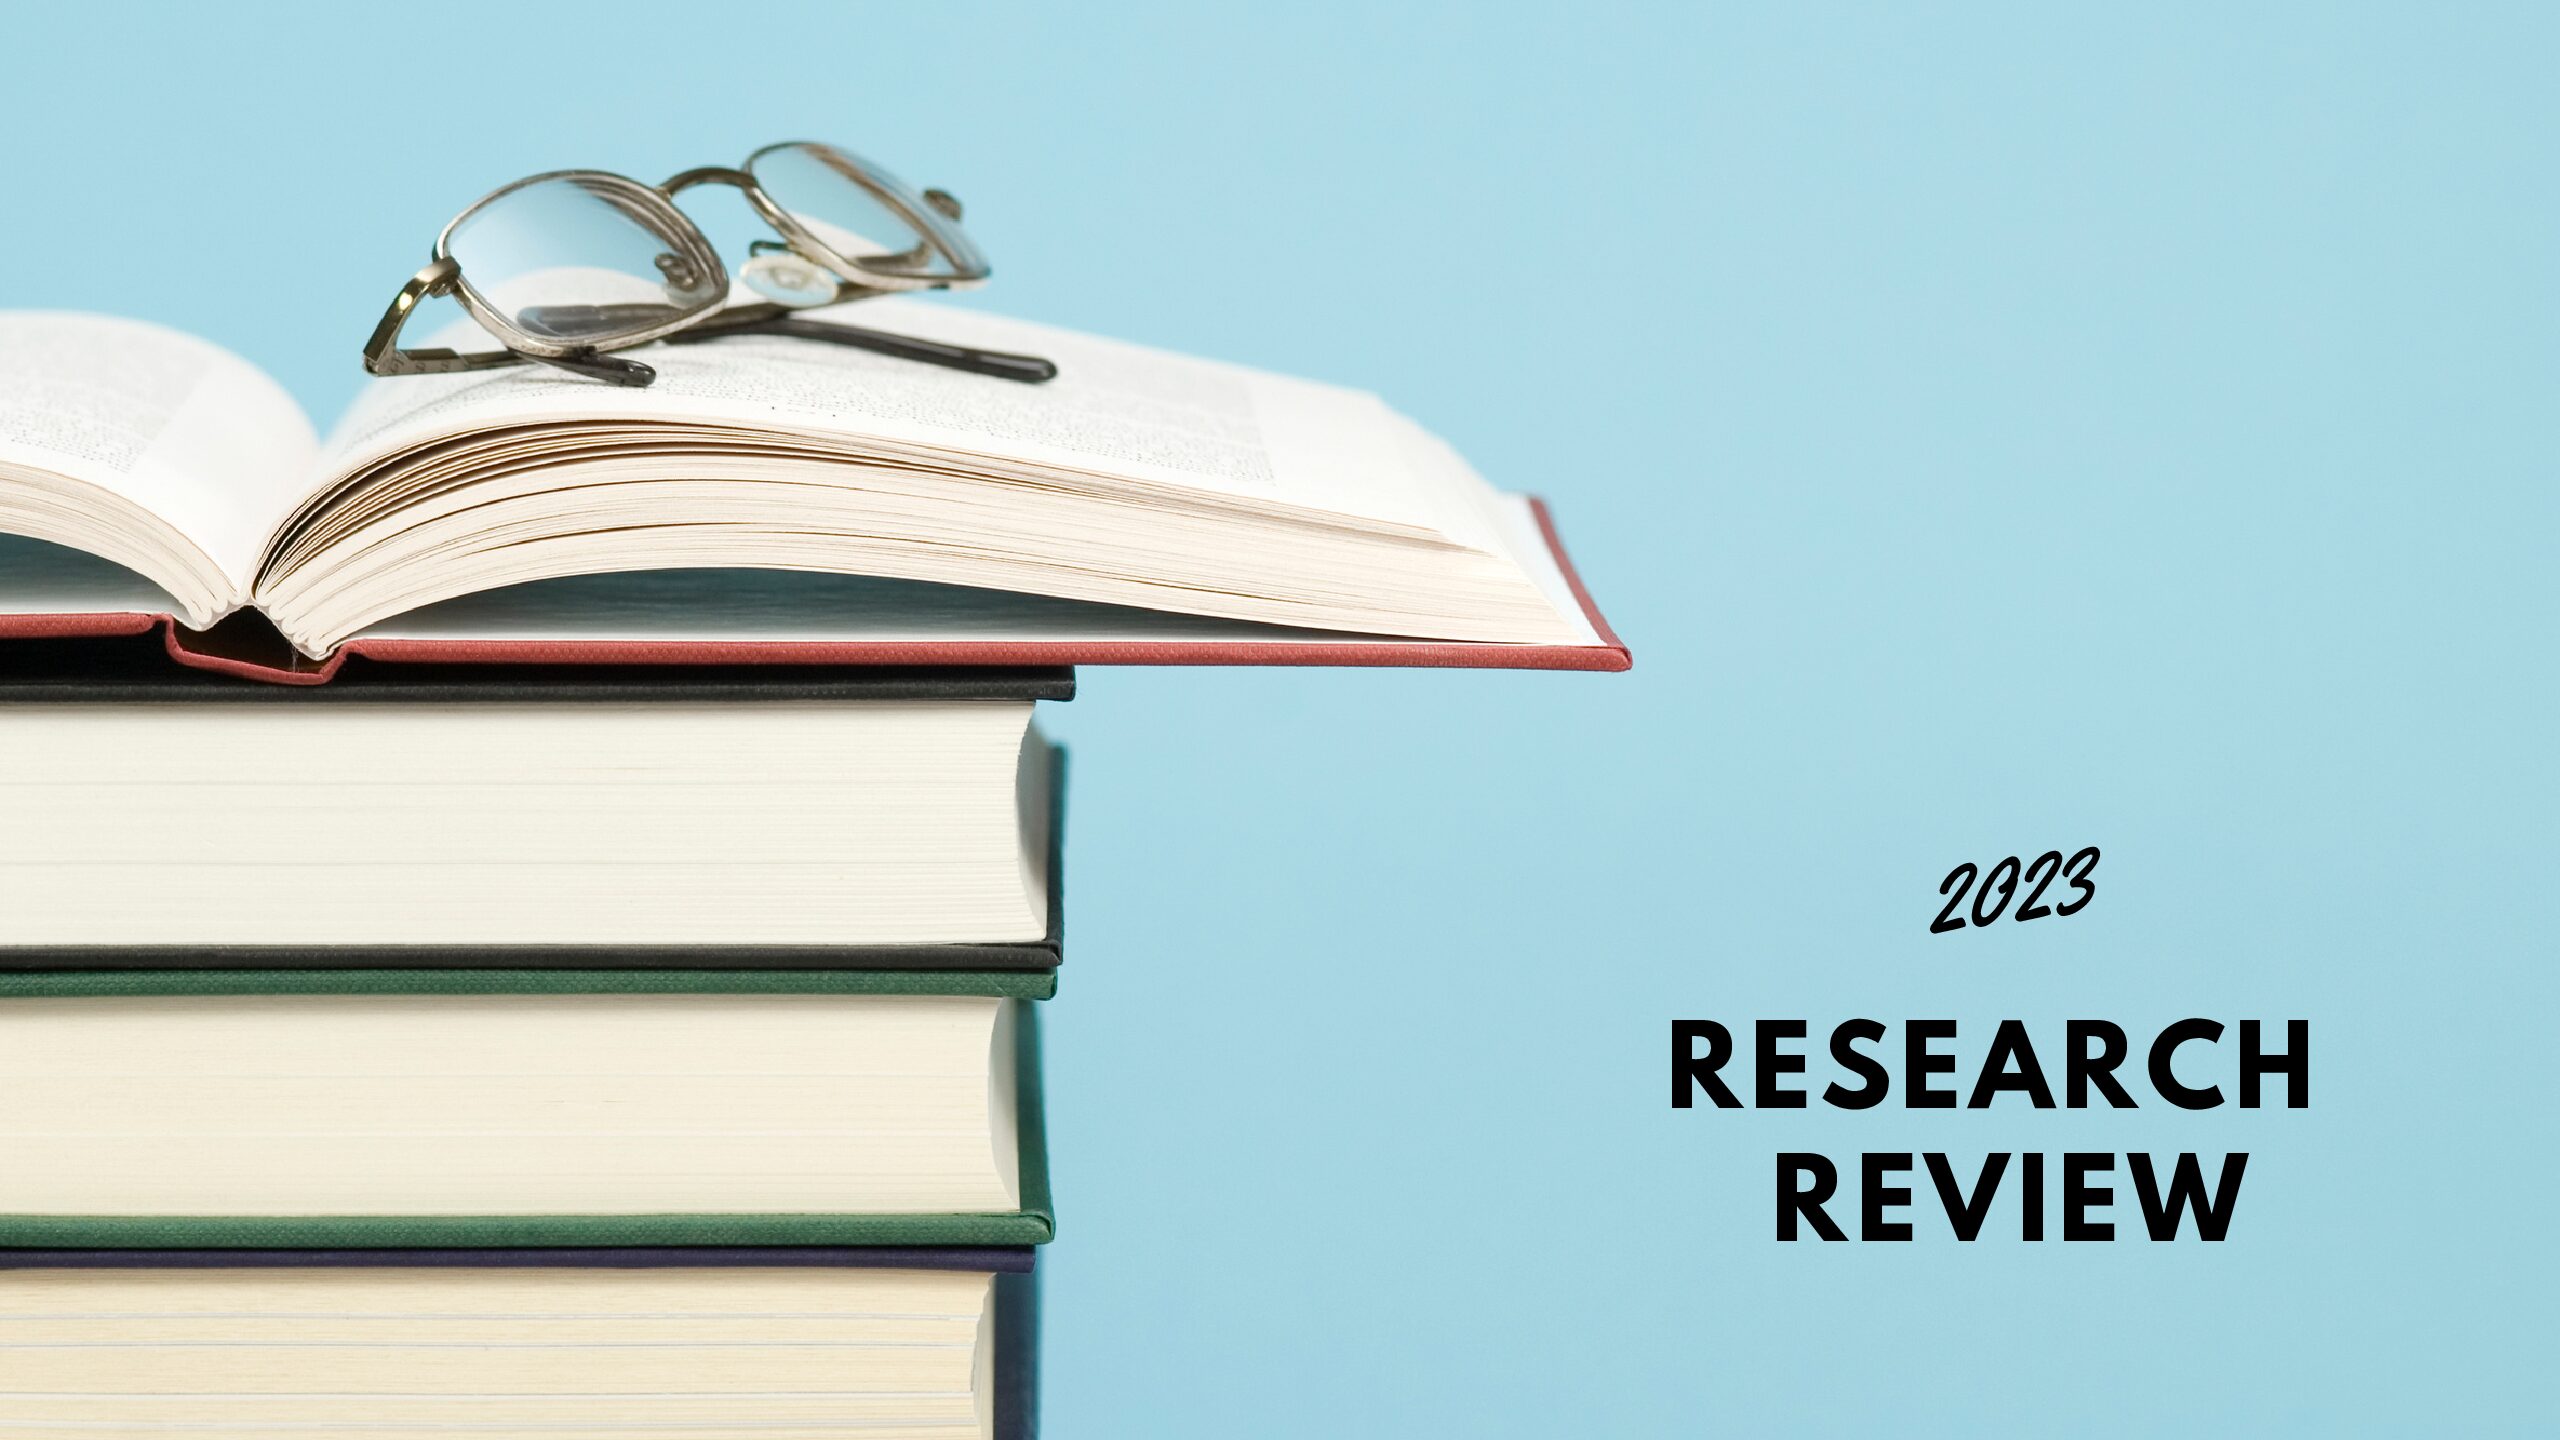 Research Review 2023